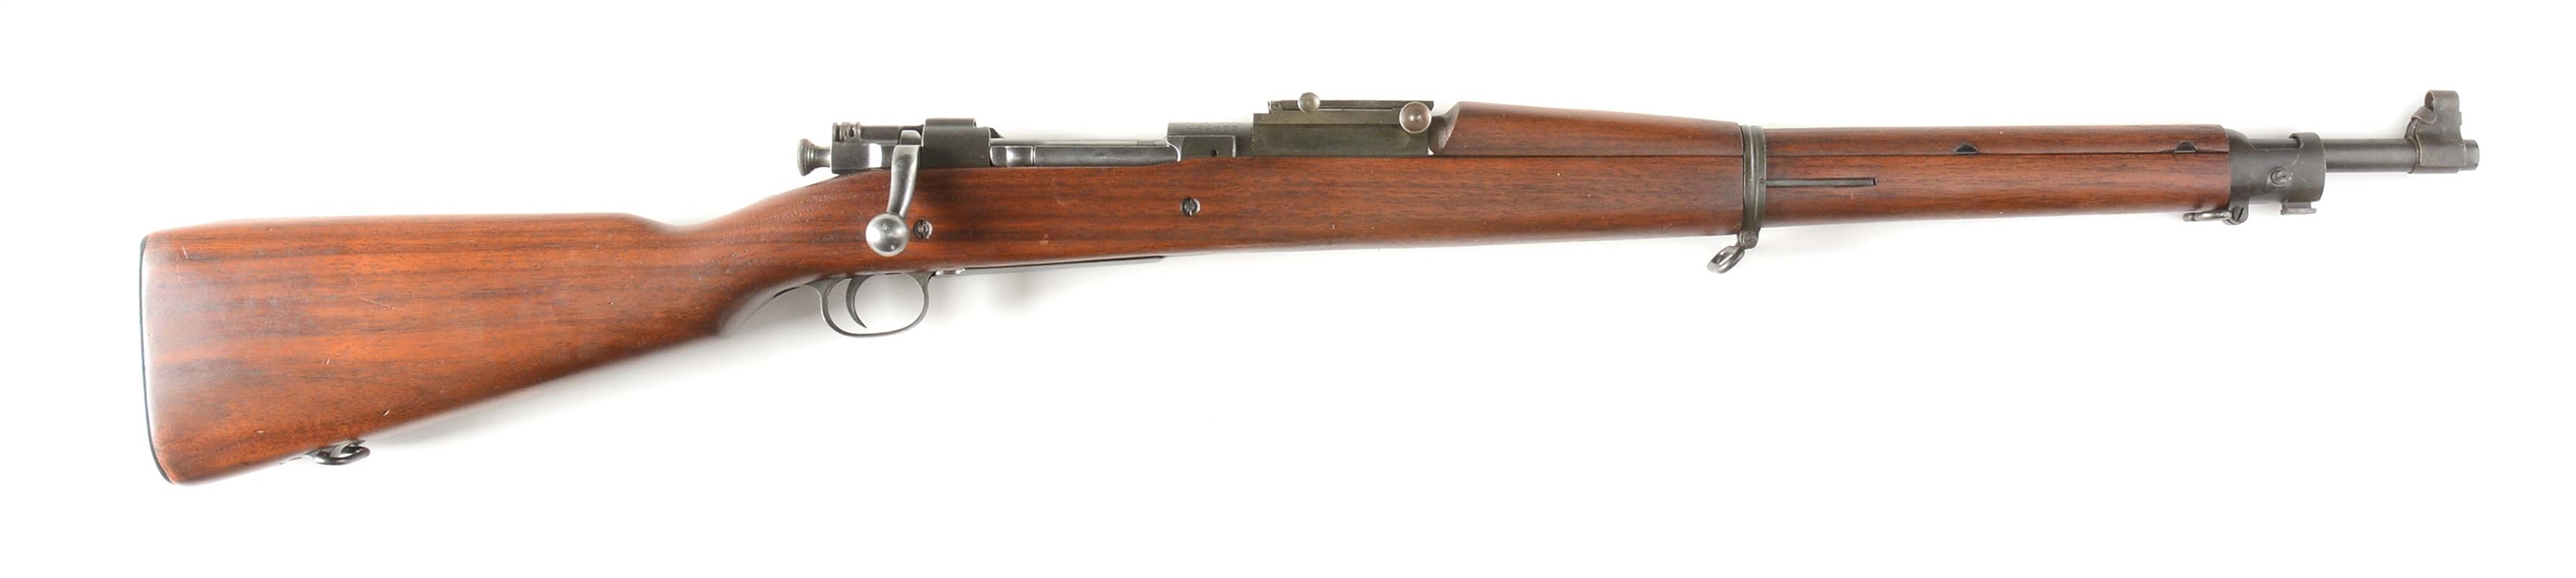 (C) SPRINGFIELD MODEL 1903 NATIONAL MATCH BOLT ACTION RIFLE.